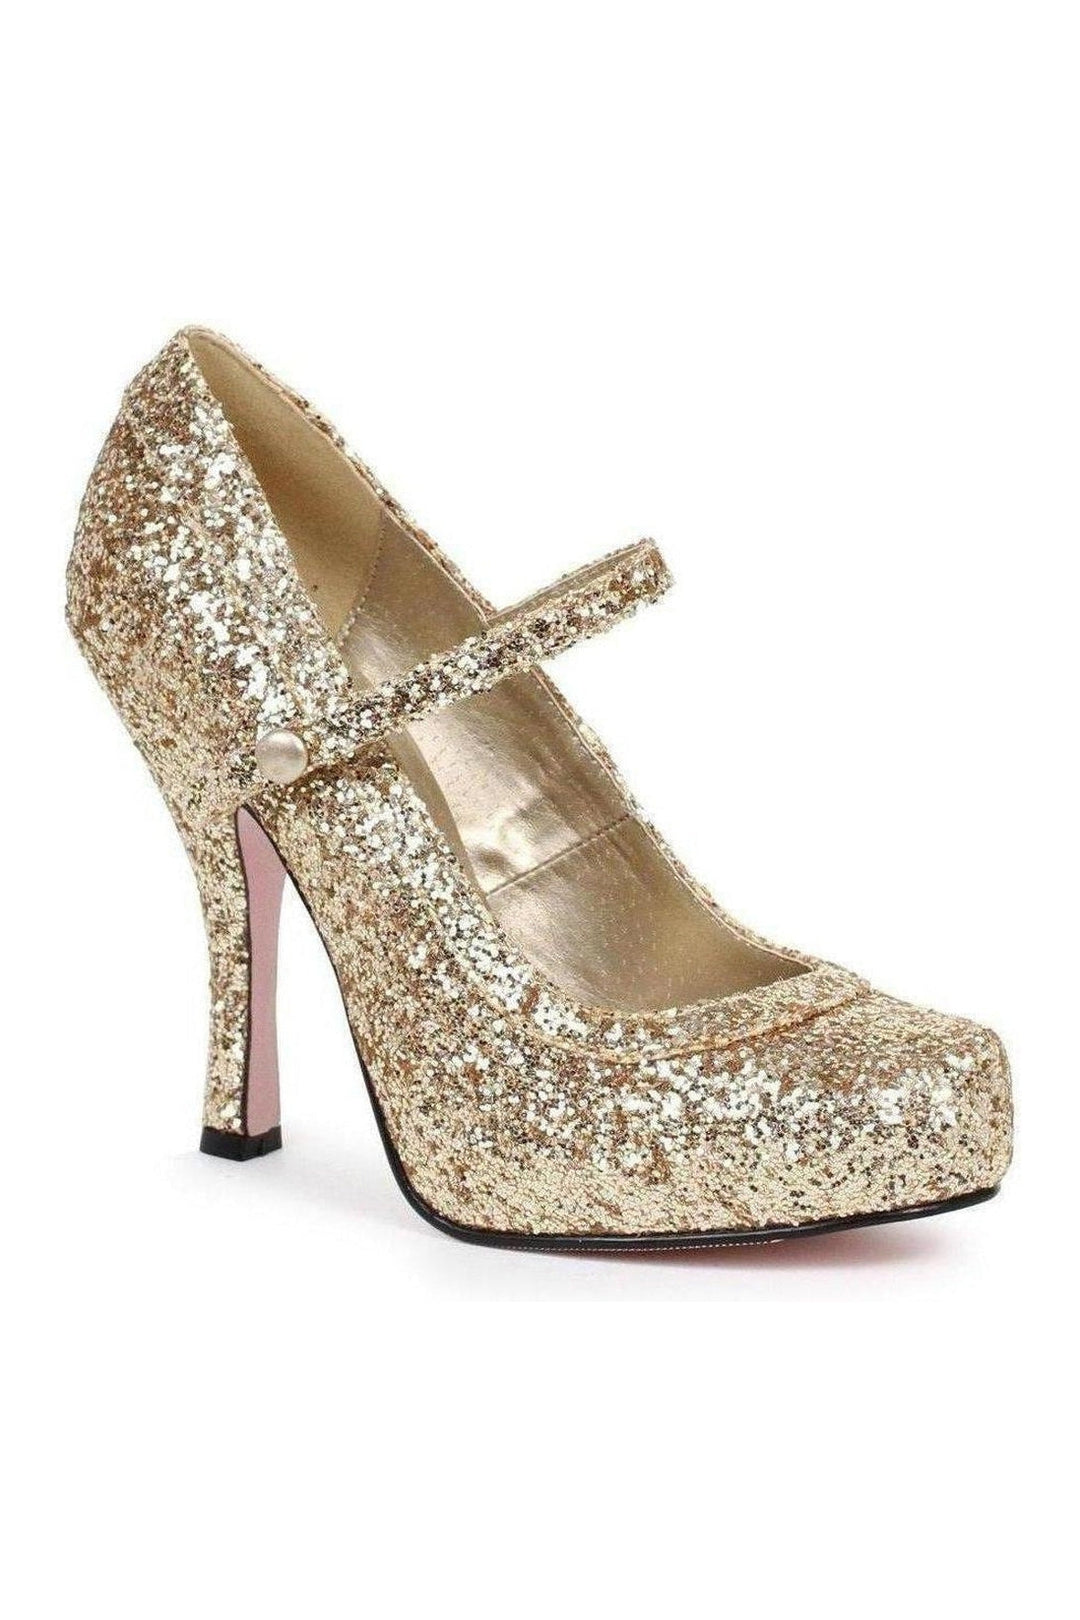 423-CANDY Costume Pump | Gold Glitter-Ellie Shoes-SEXYSHOES.COM